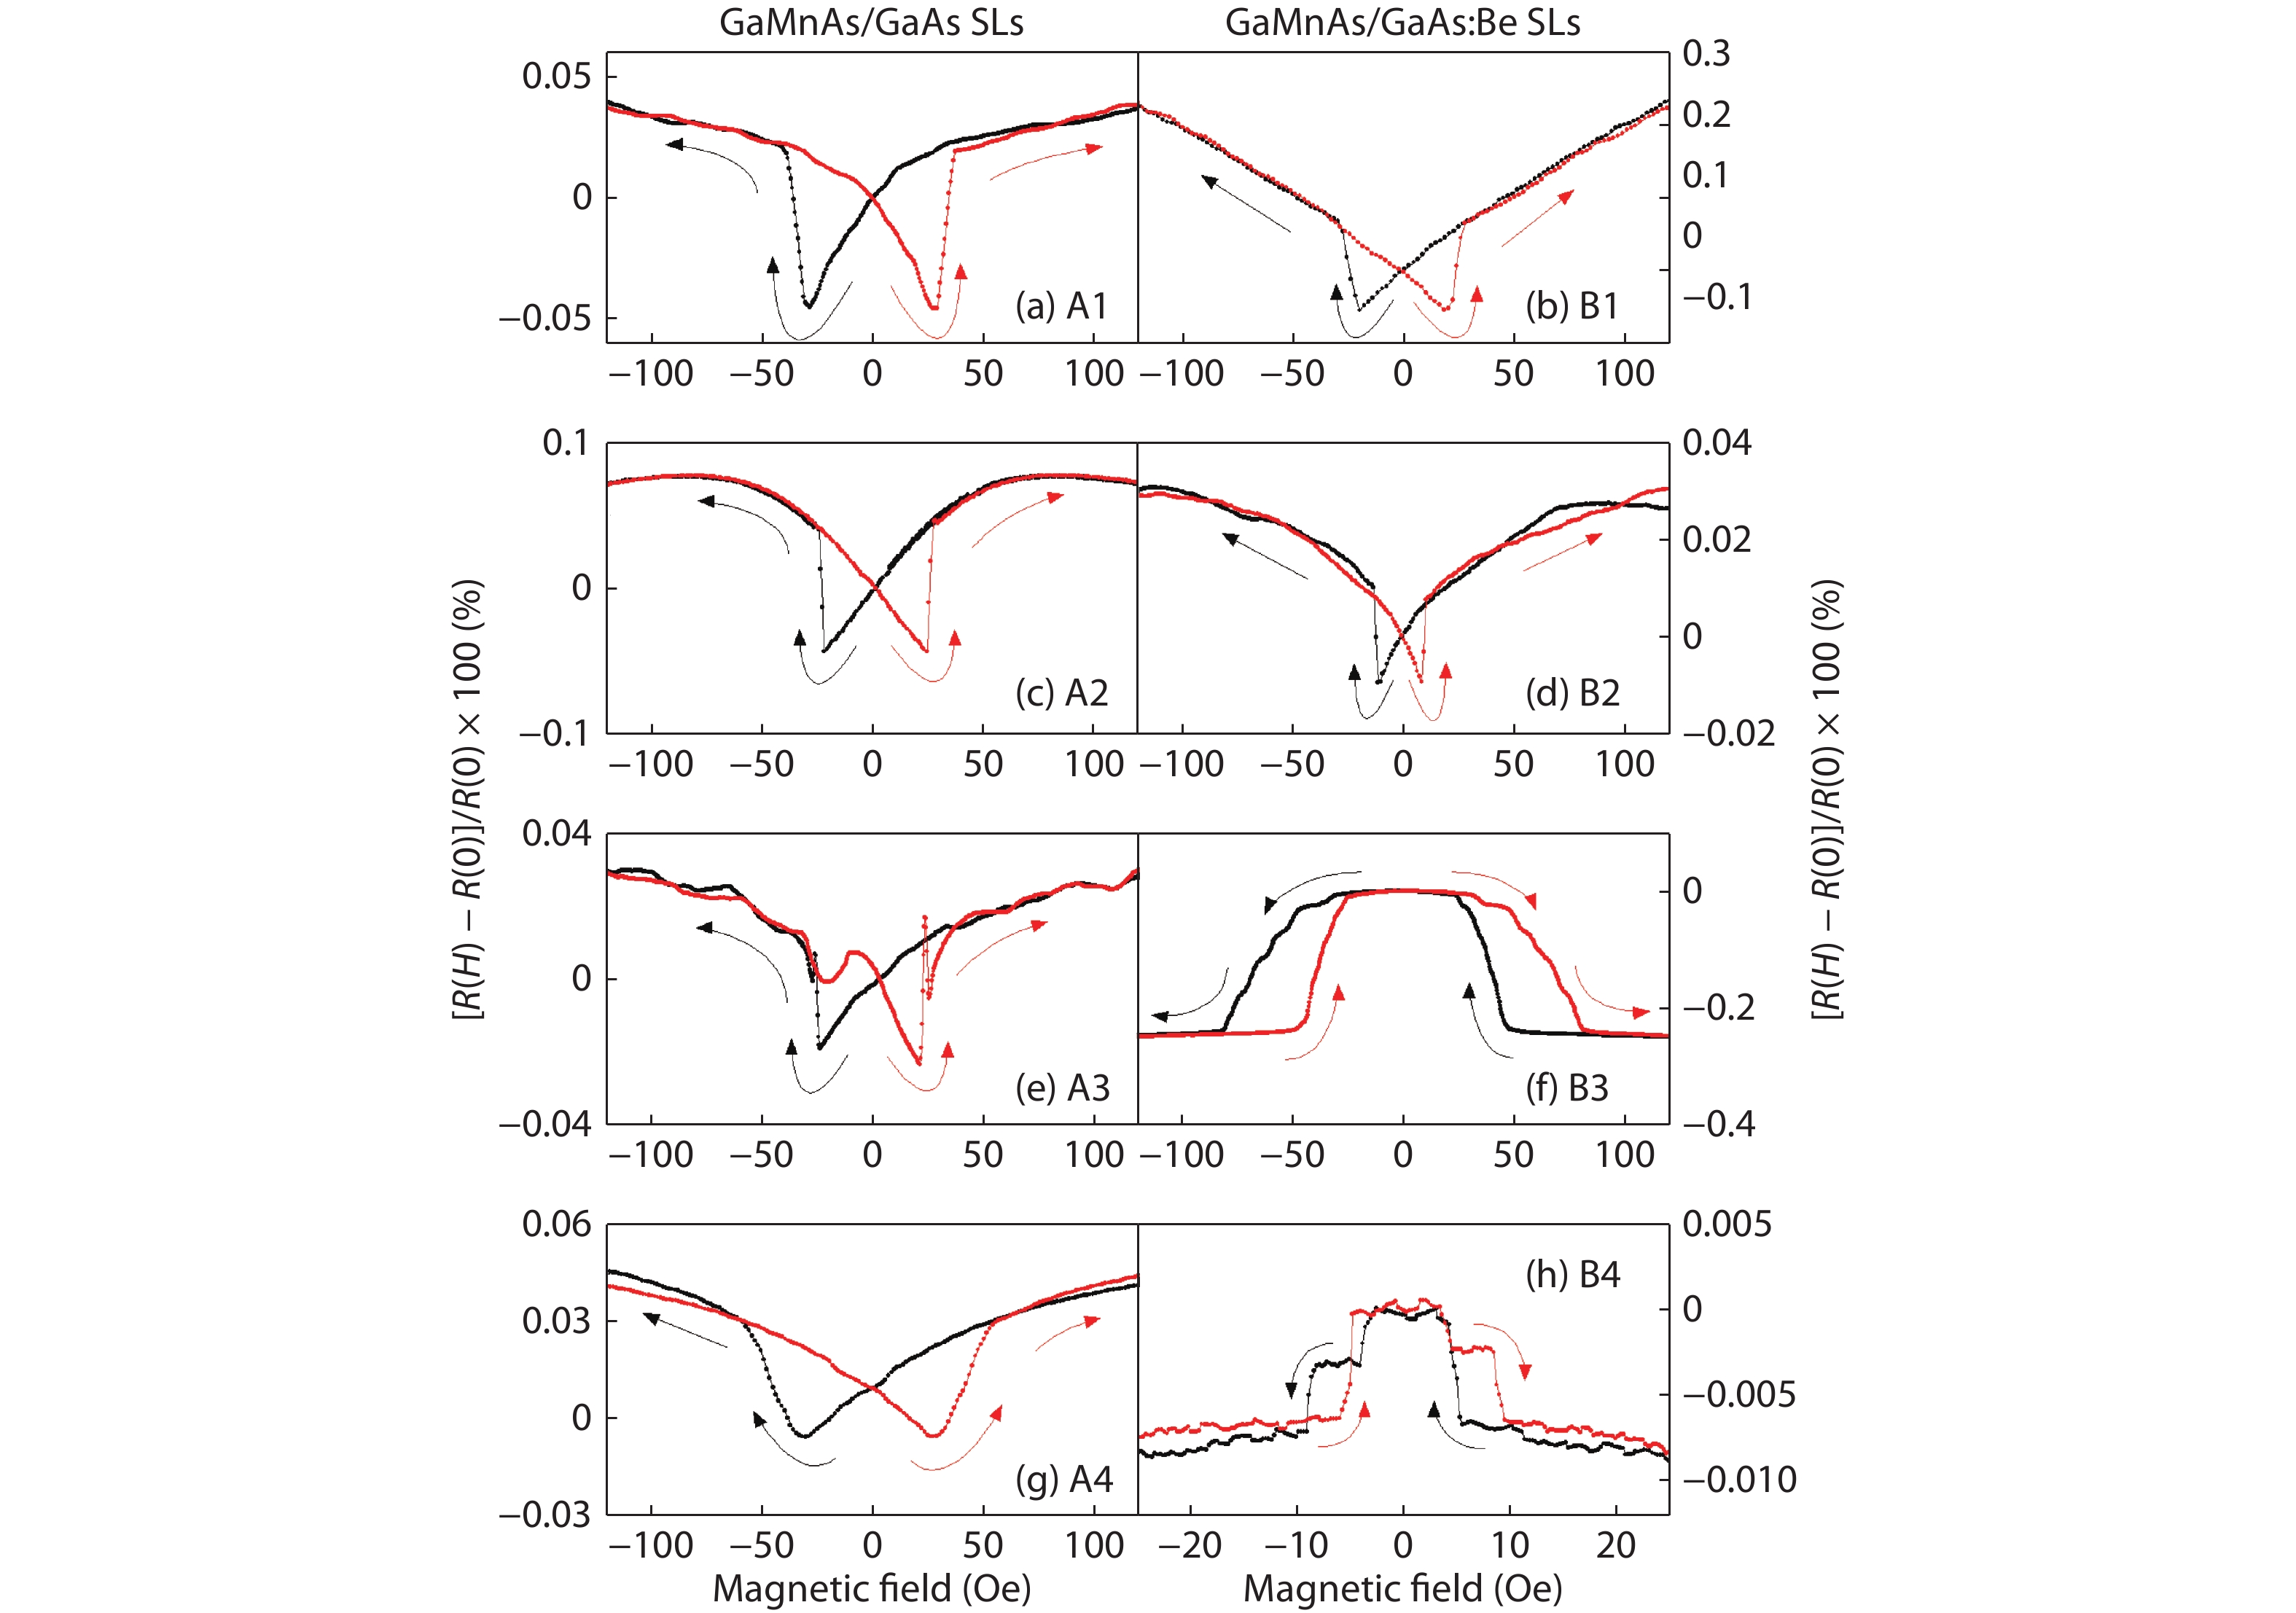 (Color online) Magnetoresistance of (Ga,Mn)As/GaAs multilayers measured with magnetic field applied near the [110] direction at T = 30 K. Although the AMR typical for (Ga,Mn)As layers dominates the MR observed in most of the samples, giant magnetorsistance (GMR)-like effect is clearly seen in samples B3 and B4, indicating the presence of AFM IEC in those specimens. The arrows indicate the direction of field scan. (Adapted from Ref. [20])